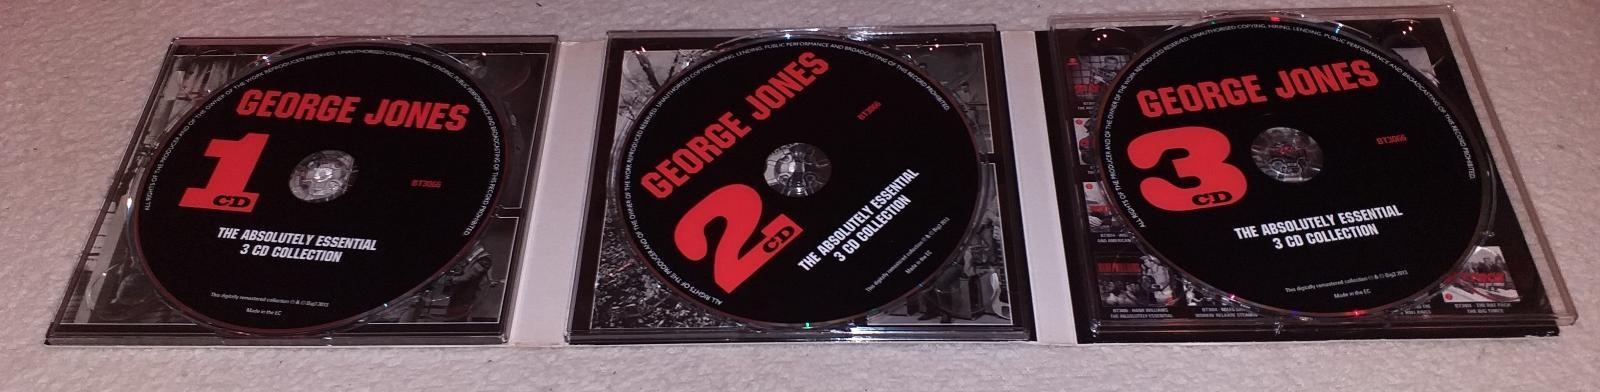 3 x CD George Jones - The Absolutely Essential 3 CD Collection